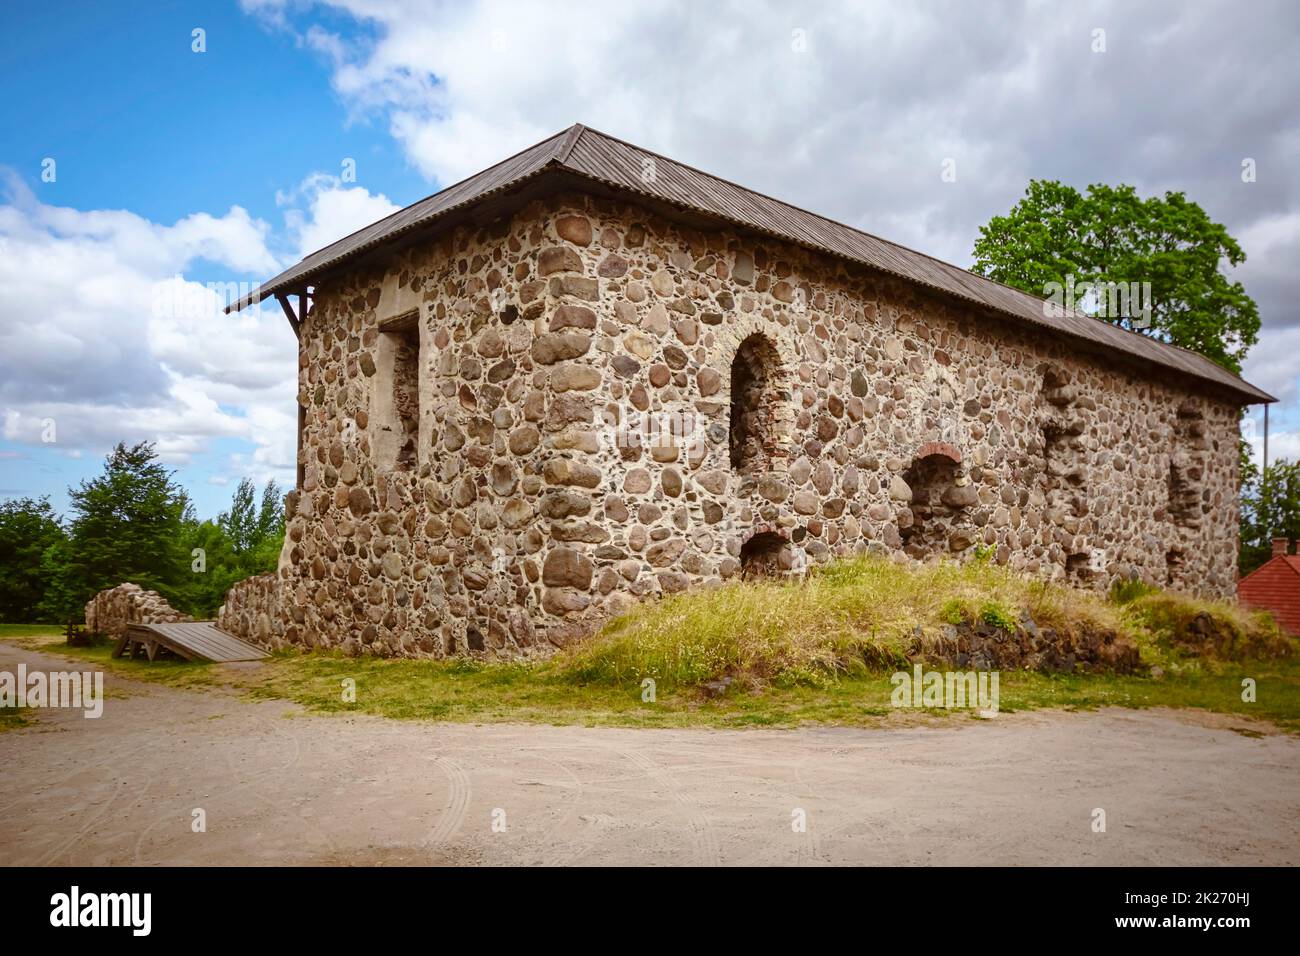 Old stone building in rural area Stock Photo